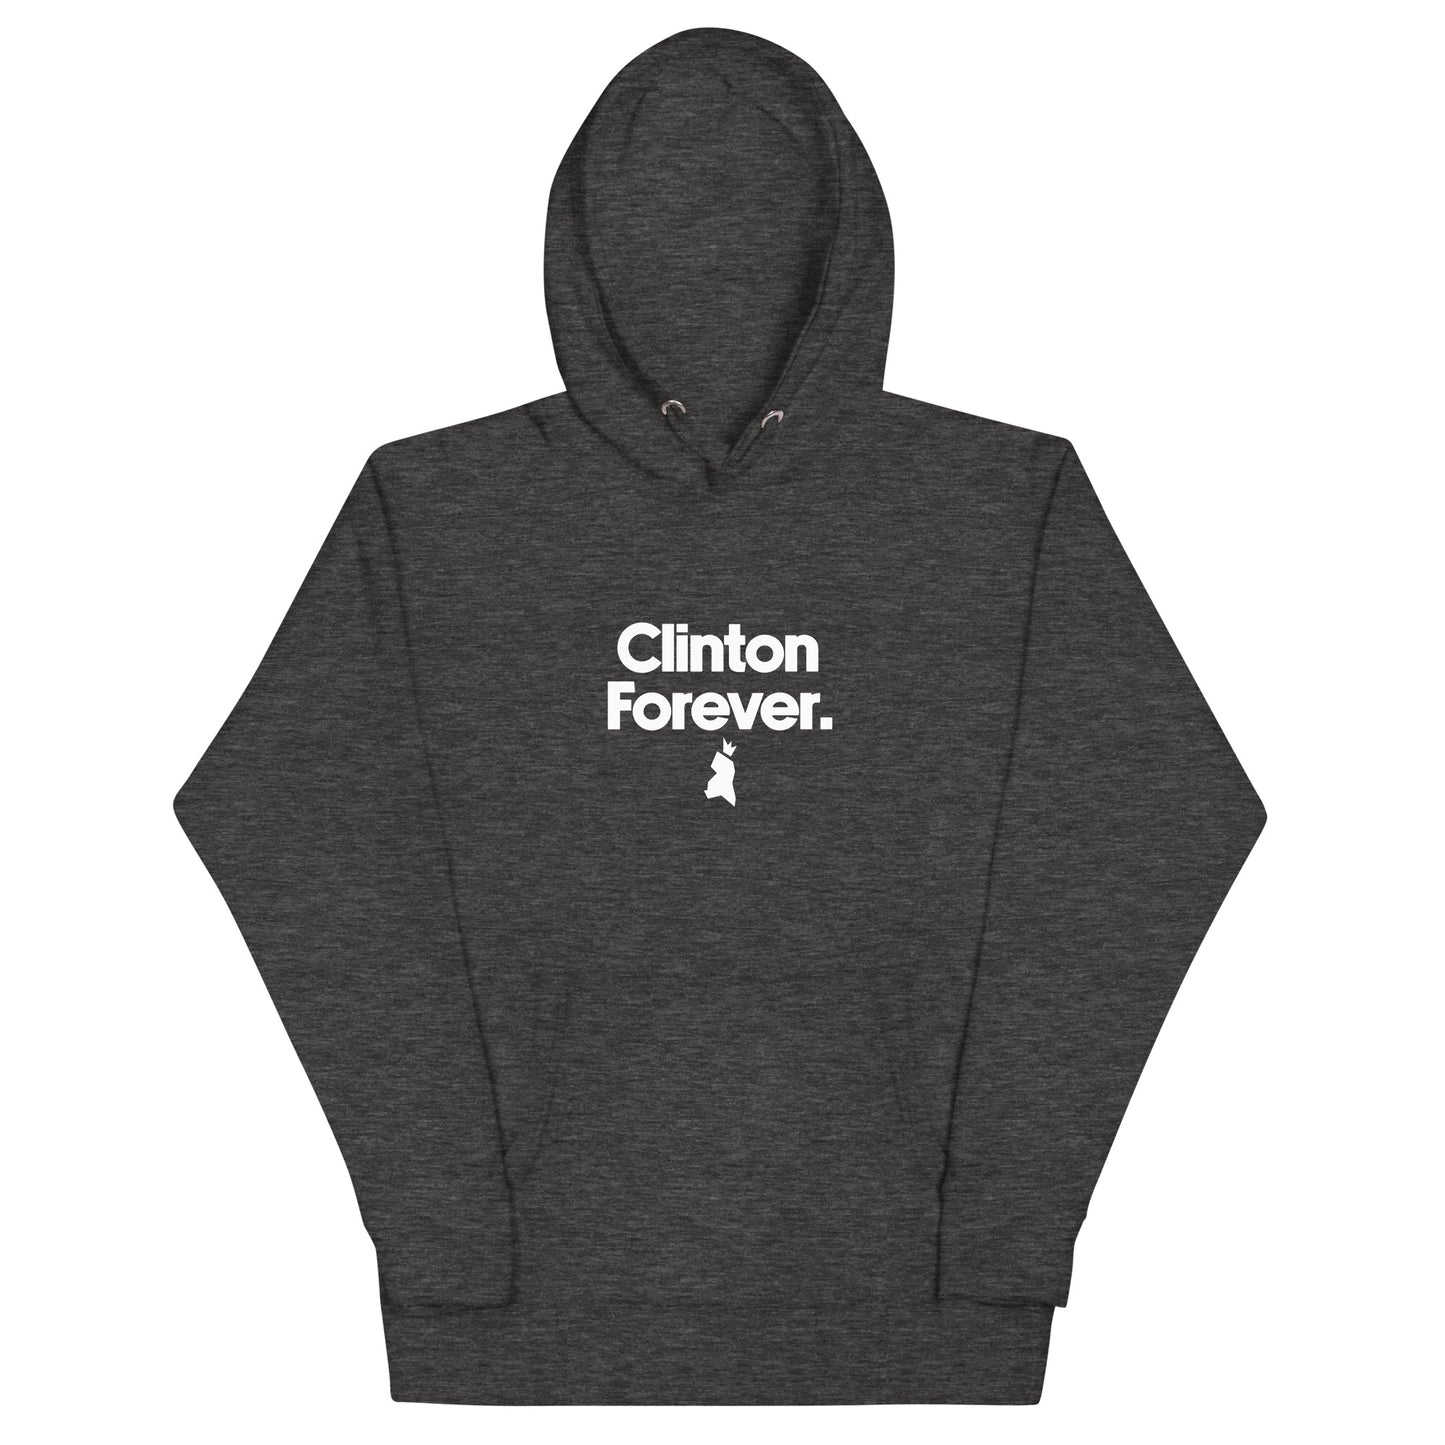 Clinton Forever Unisex Hoodie